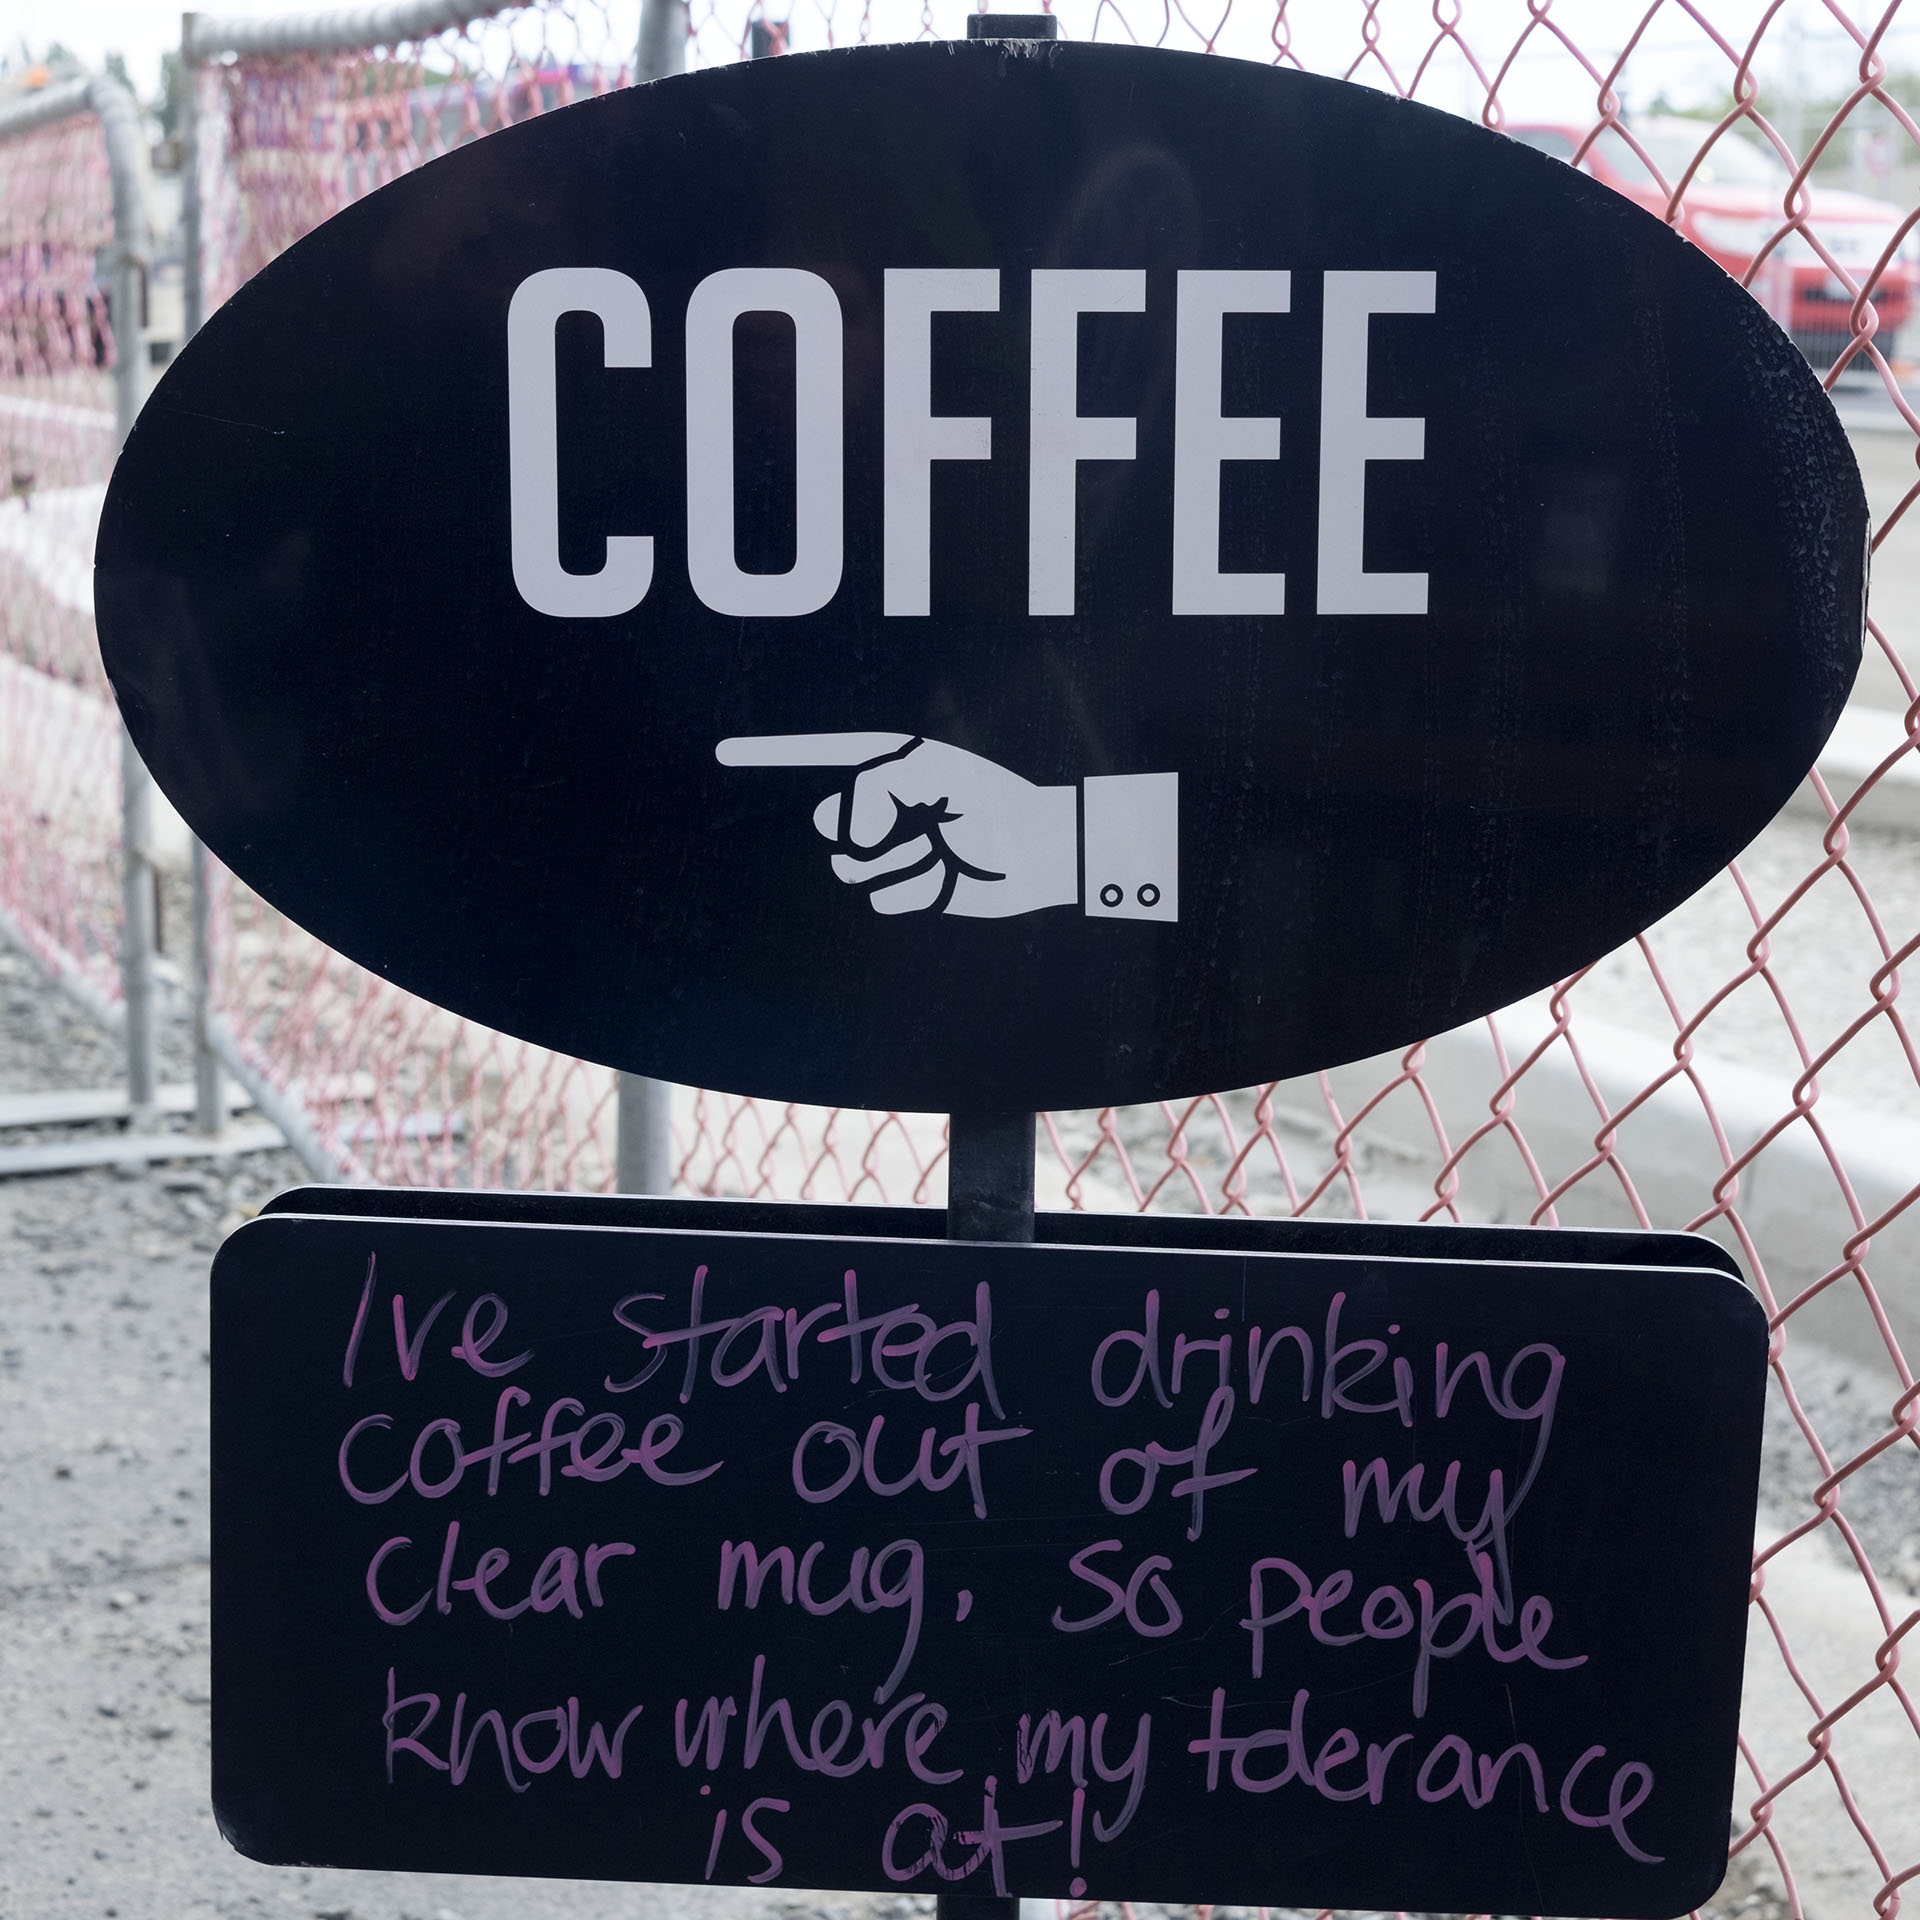 Good messaging with Great Coffee Fast!